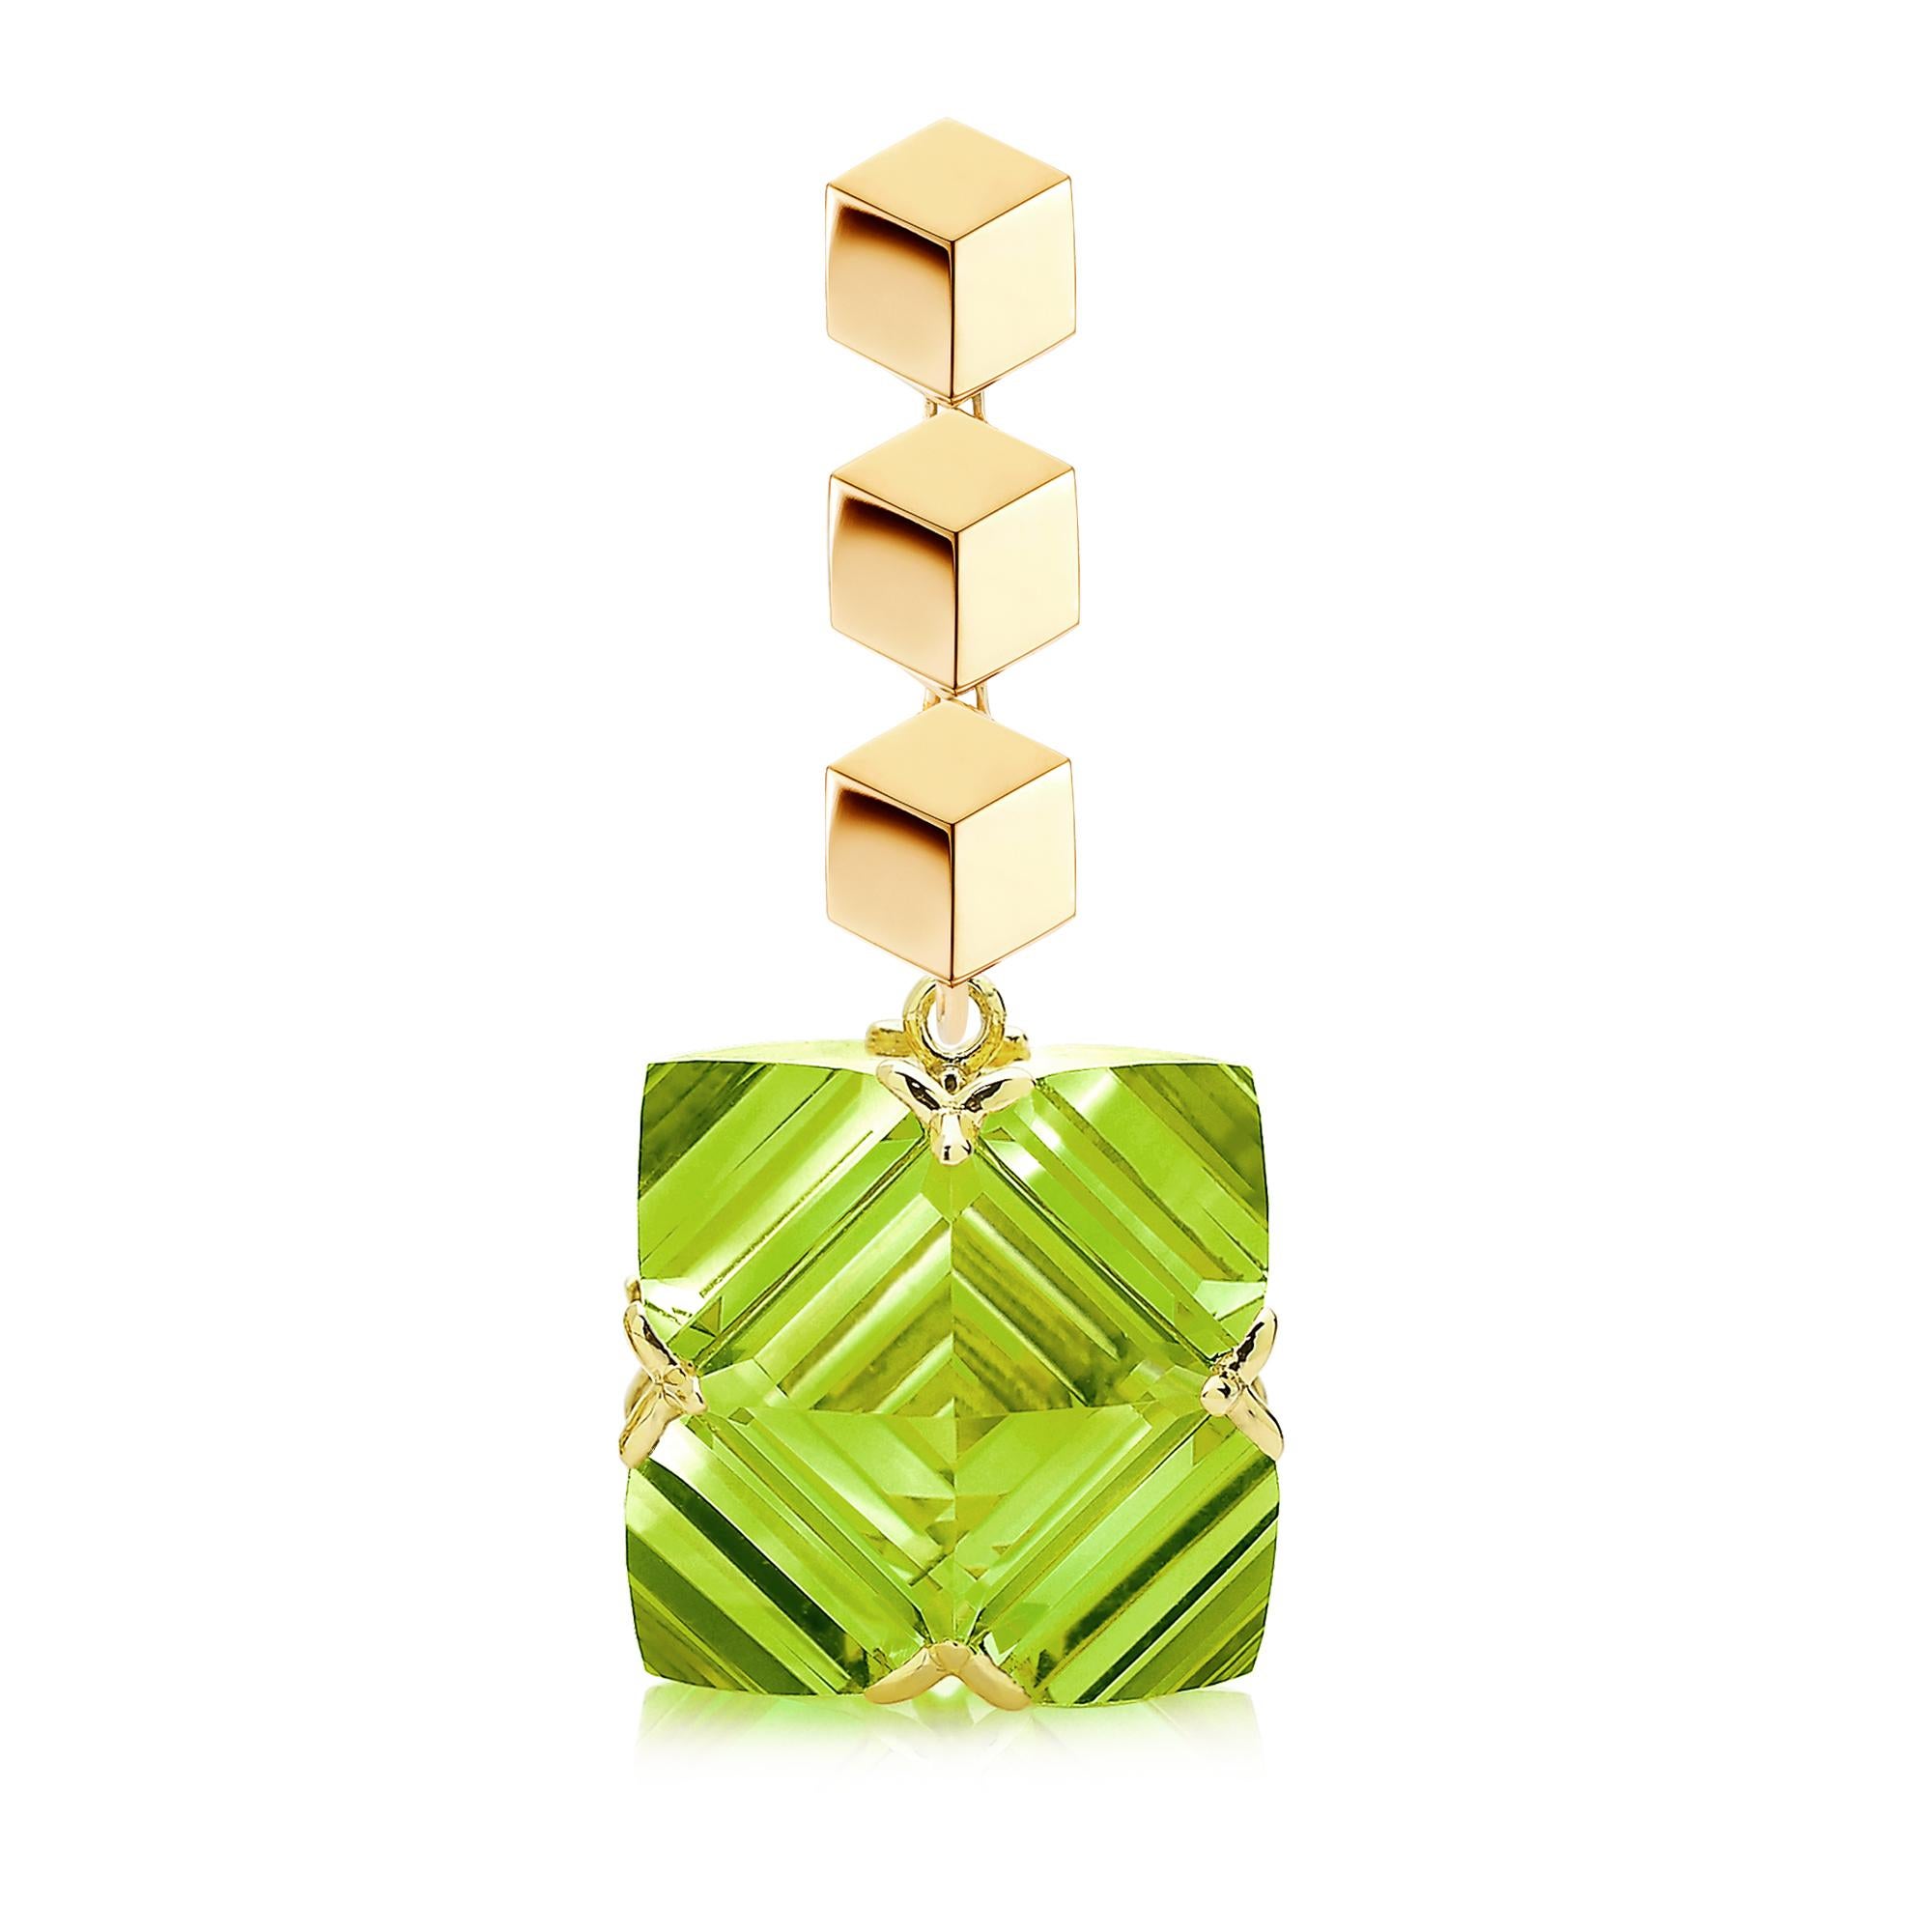 High polish 18 karat yellow gold Brillante® earrings paired with reverse set emerald-cut peridot earring pendants from the Very PC®collection.

Staying true to Paolo Costagli’s appreciation for modern and clean geometries, the Very PC® collection